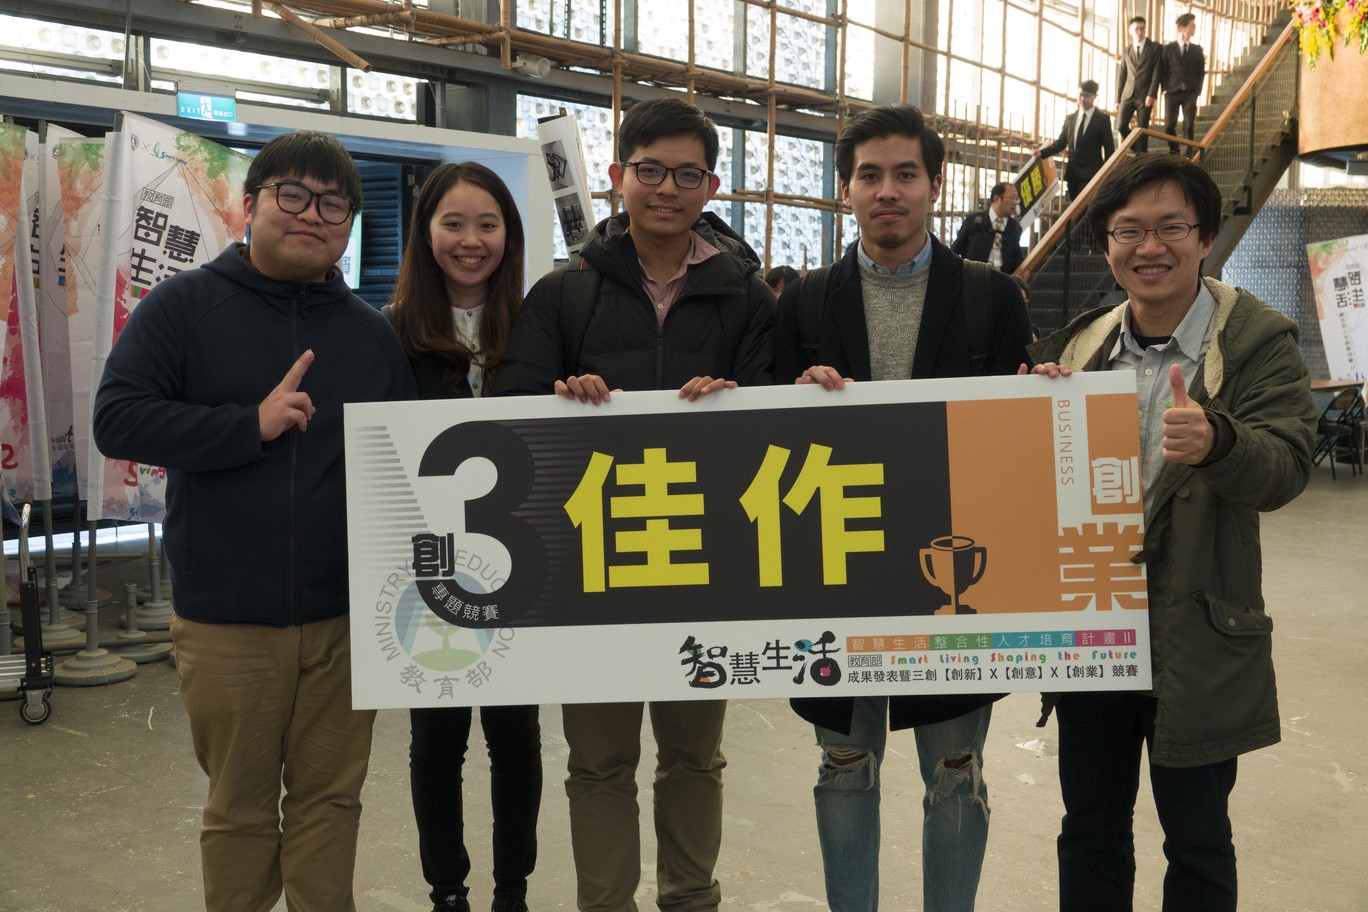 Lab members win “Excellent Award” of the Startup competition of the Ministry of Education of Taiwan